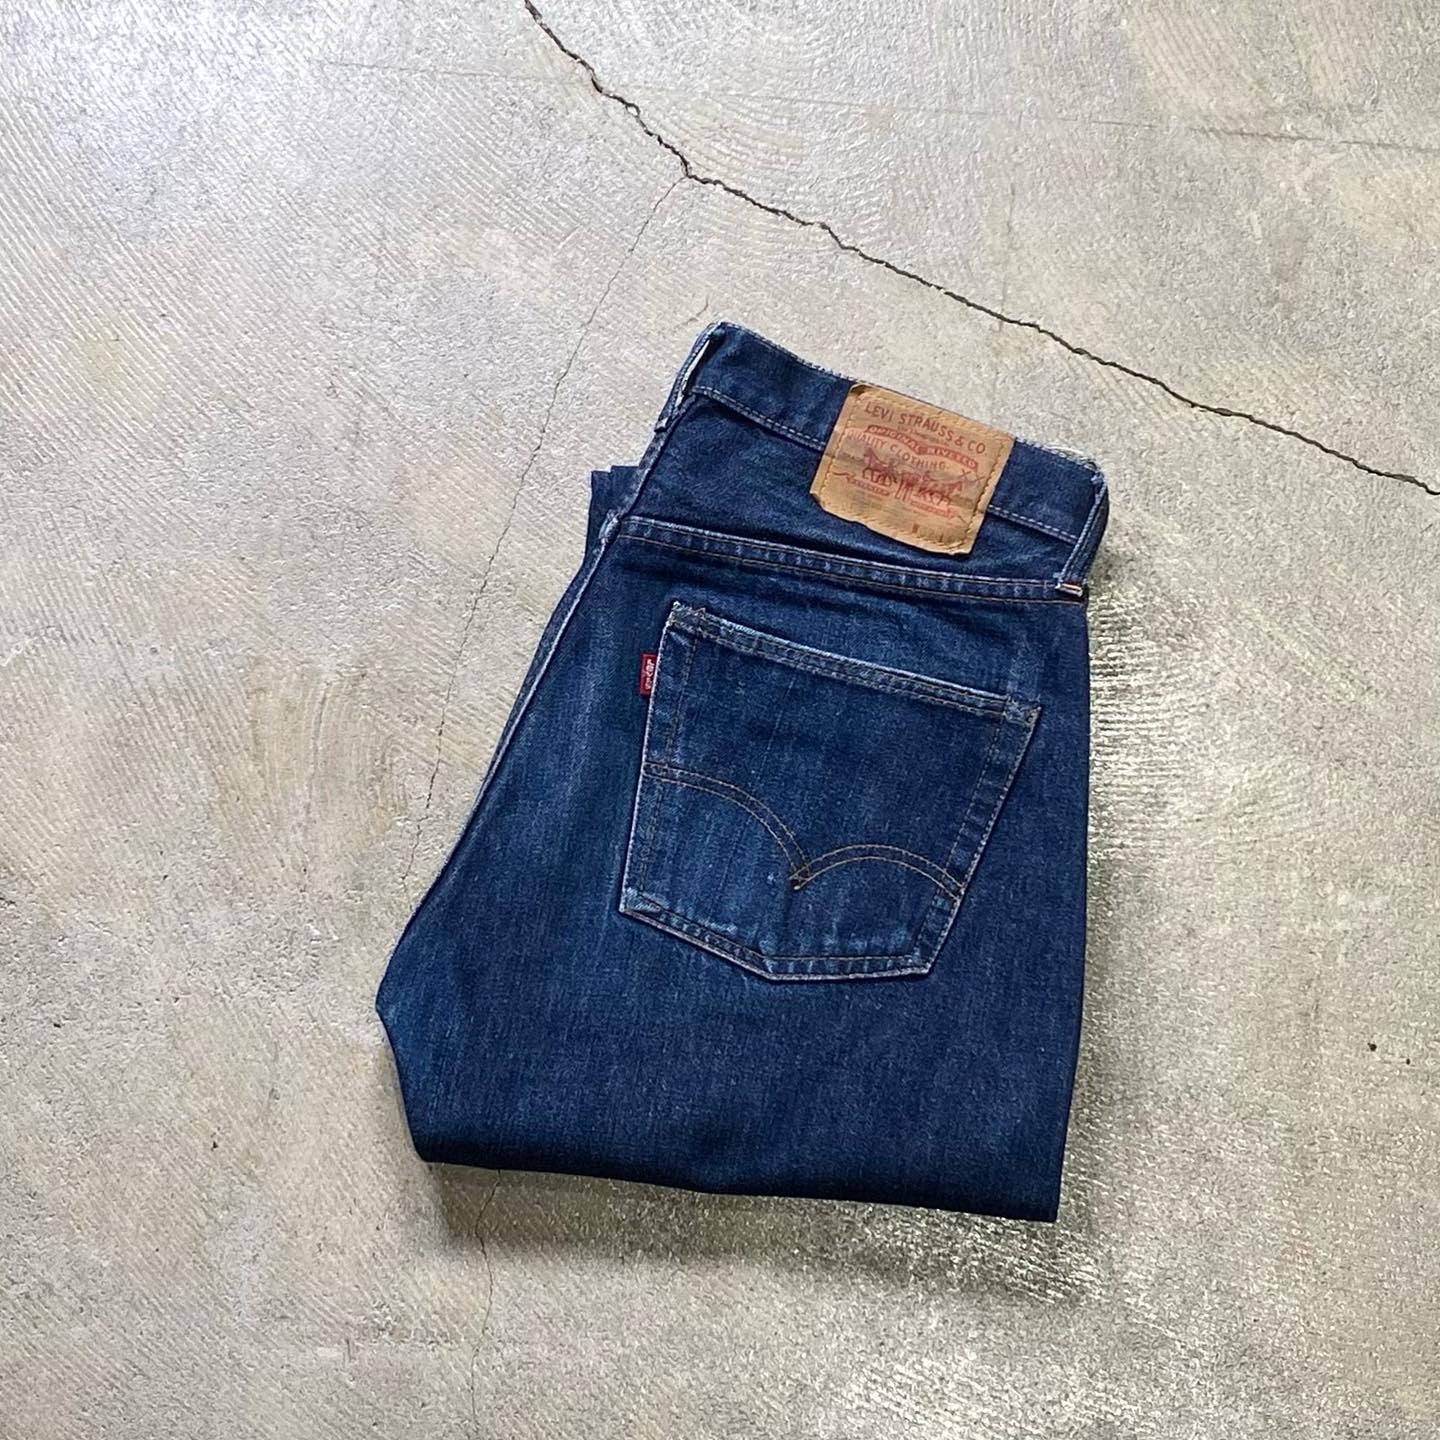 1970's LEVIS 501 66SS (16BUTTON / VERY GOOD COLOR & CONDITION)